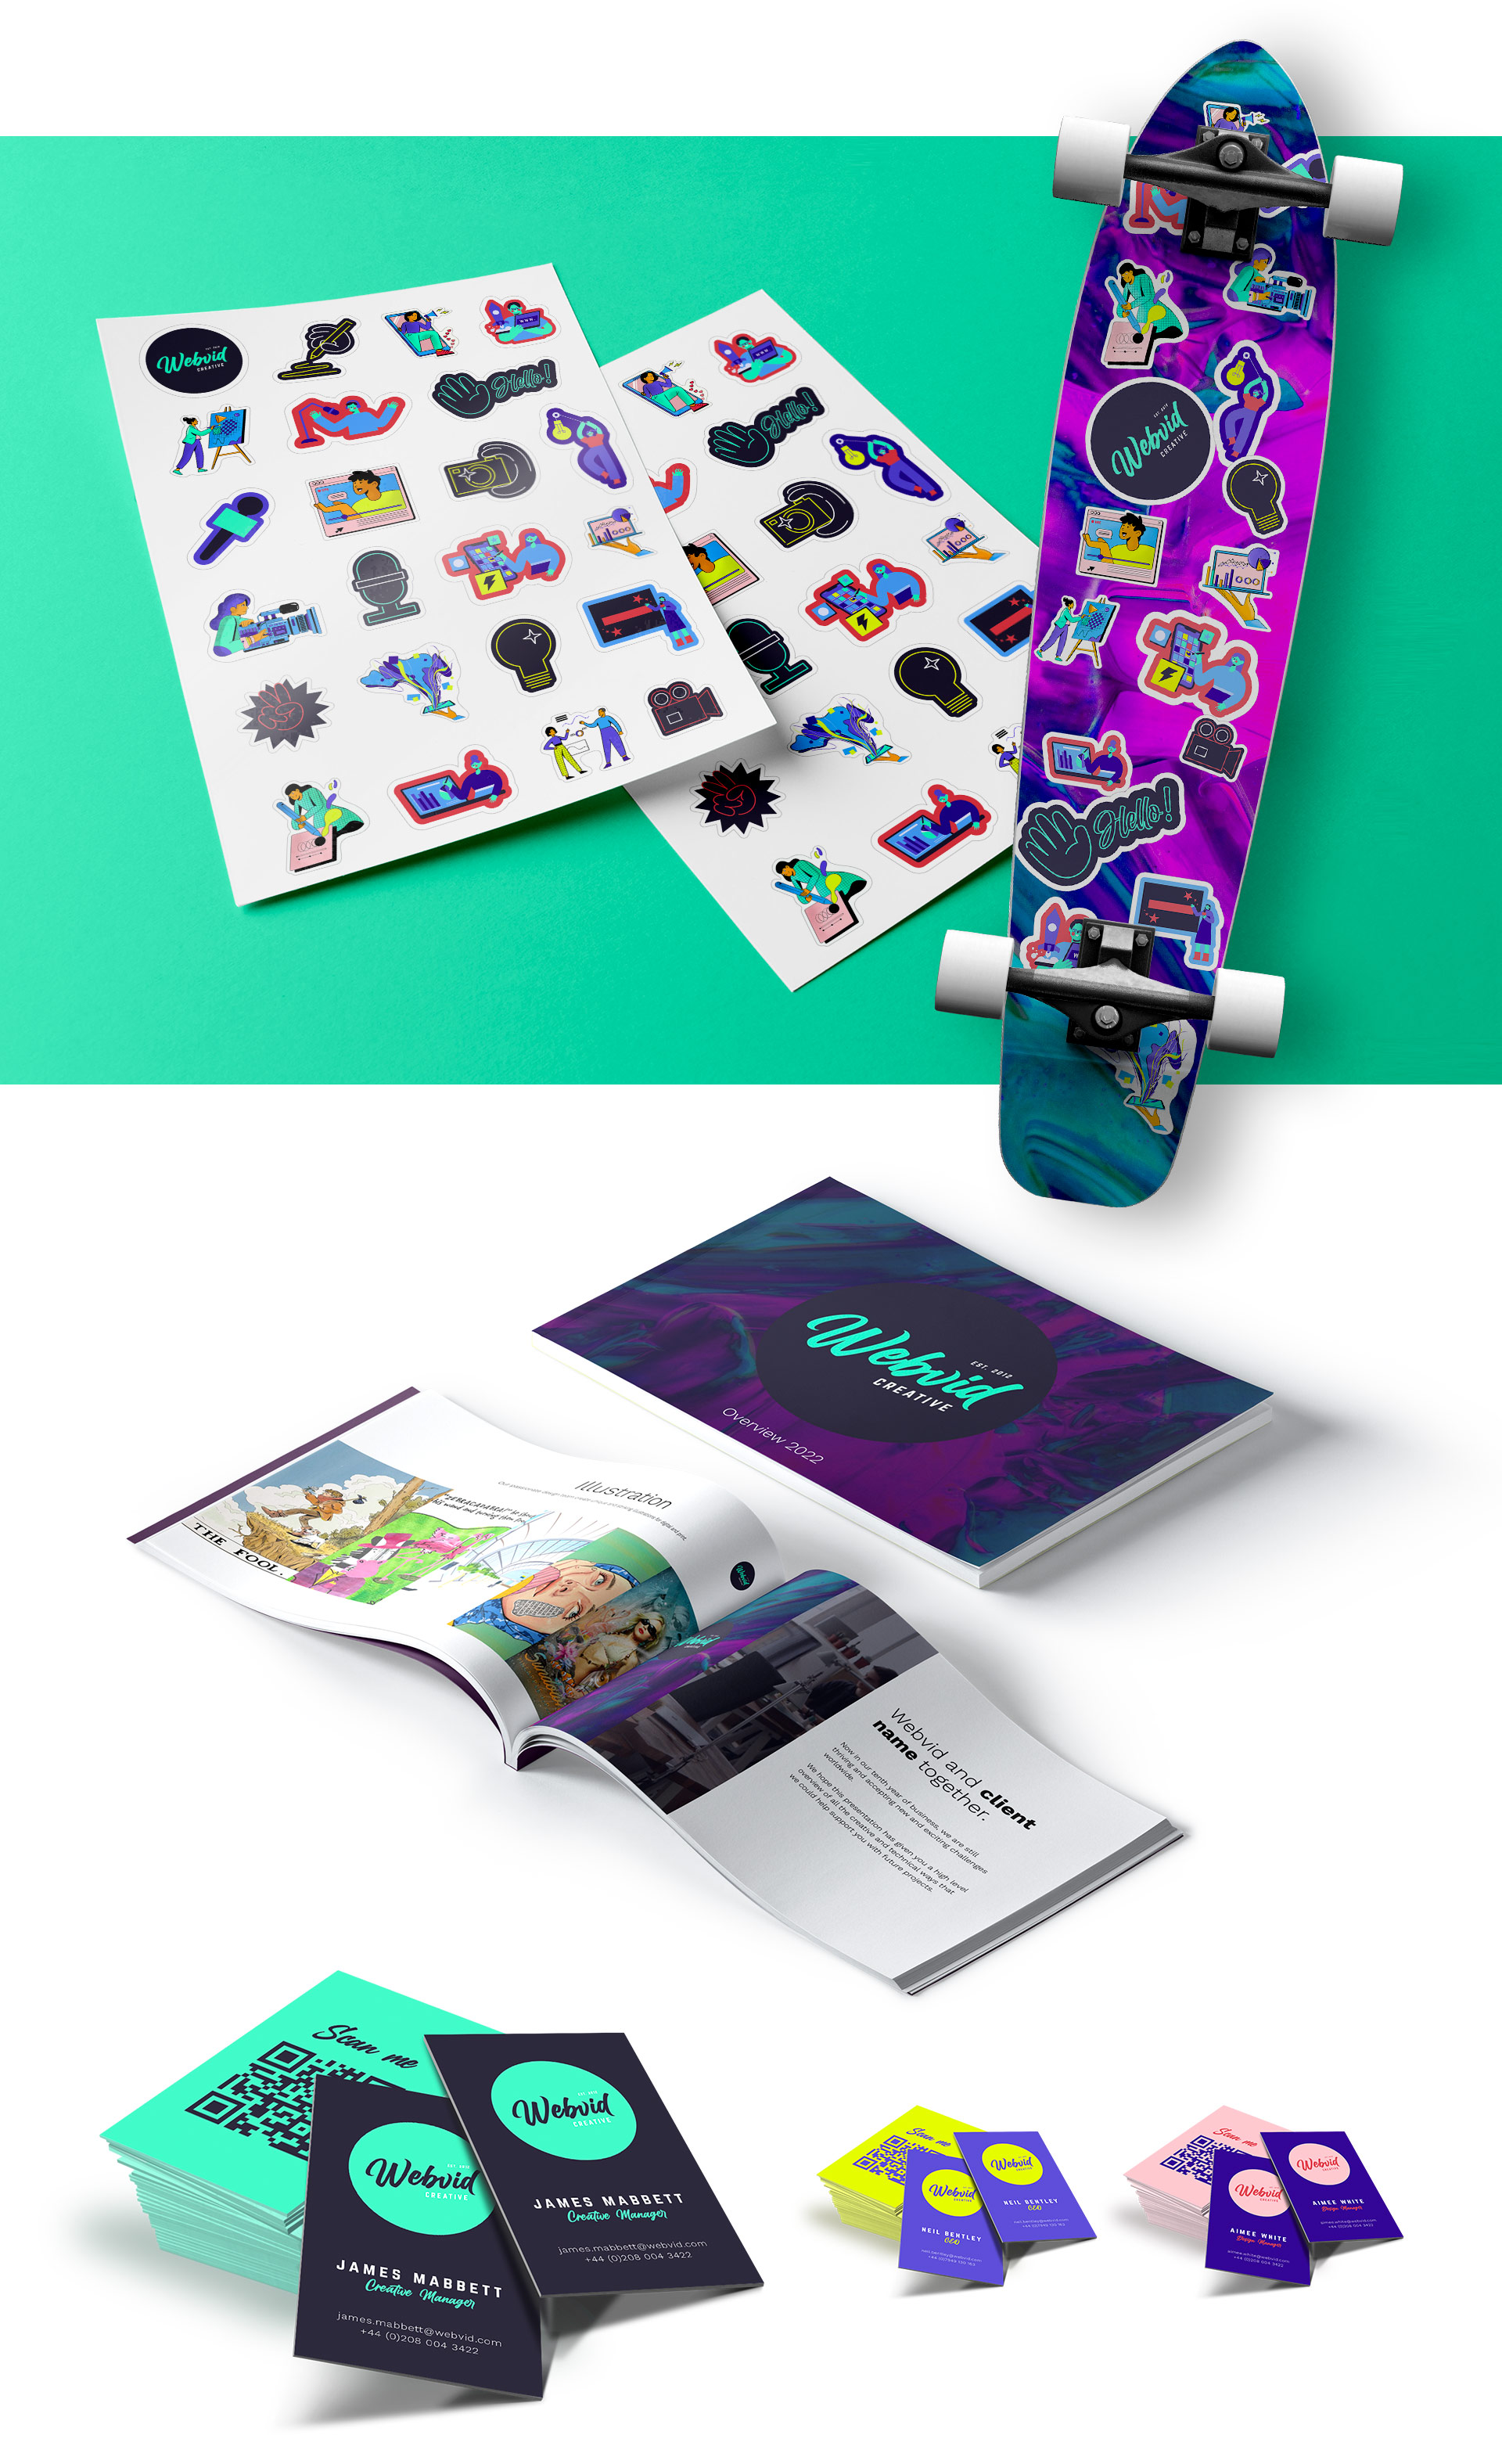 webvid rebrand iconography and printed items